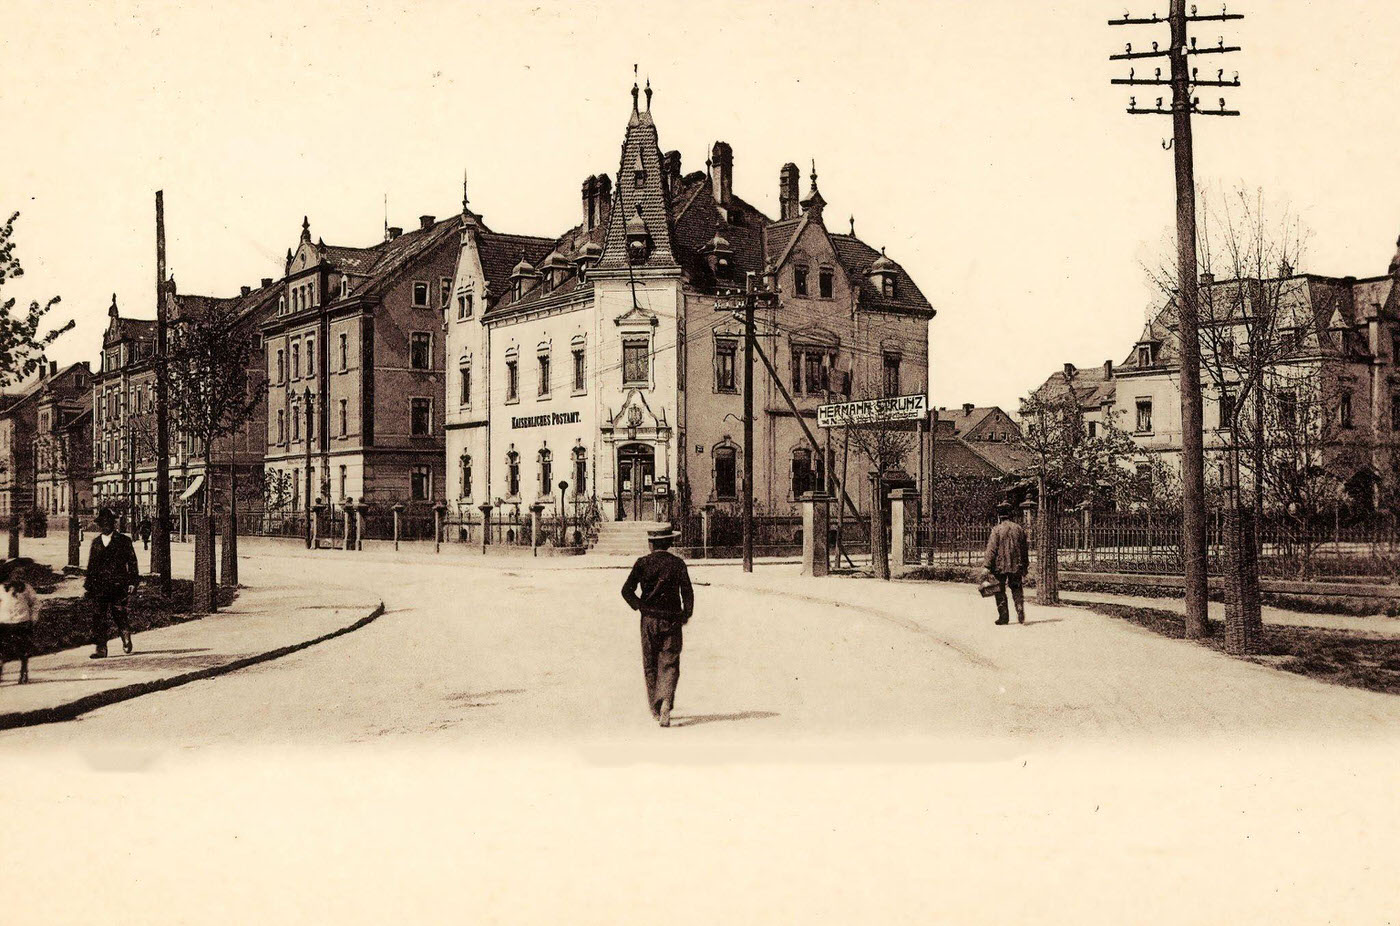 Post offices in Saxony, Buildings in Floha, Germany, 1903.